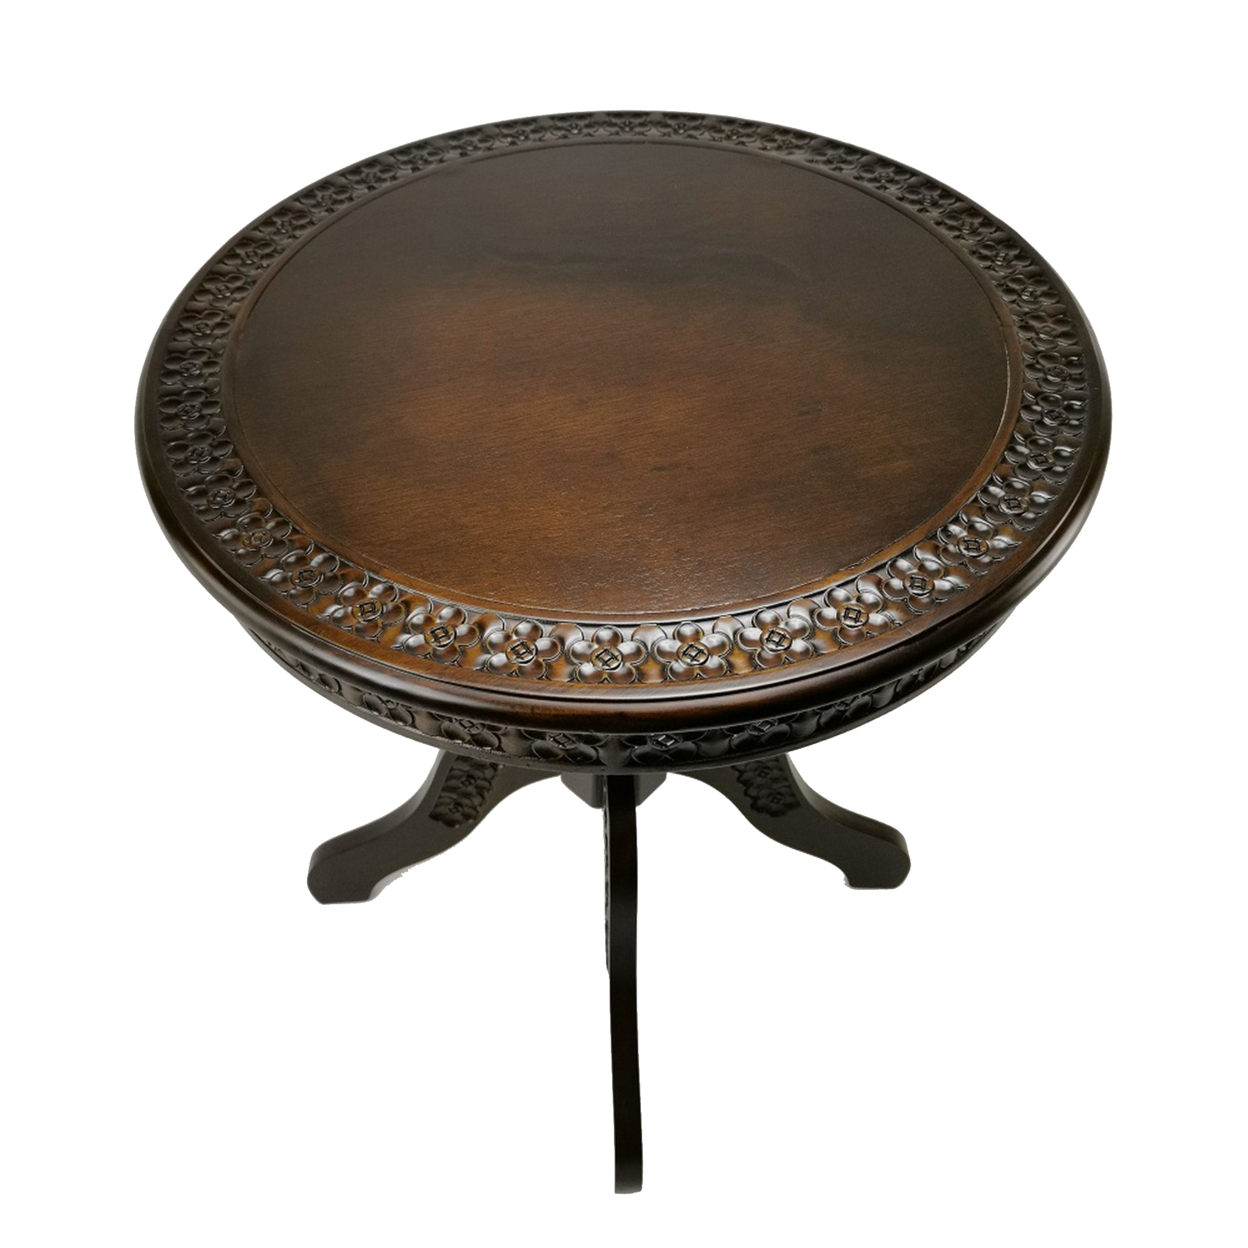 Theo 26 Inch Classic Wood Side Table, Round Tabletop, Floral Cared, Brown- Saltoro Sherpi- Saltoro Sherpi